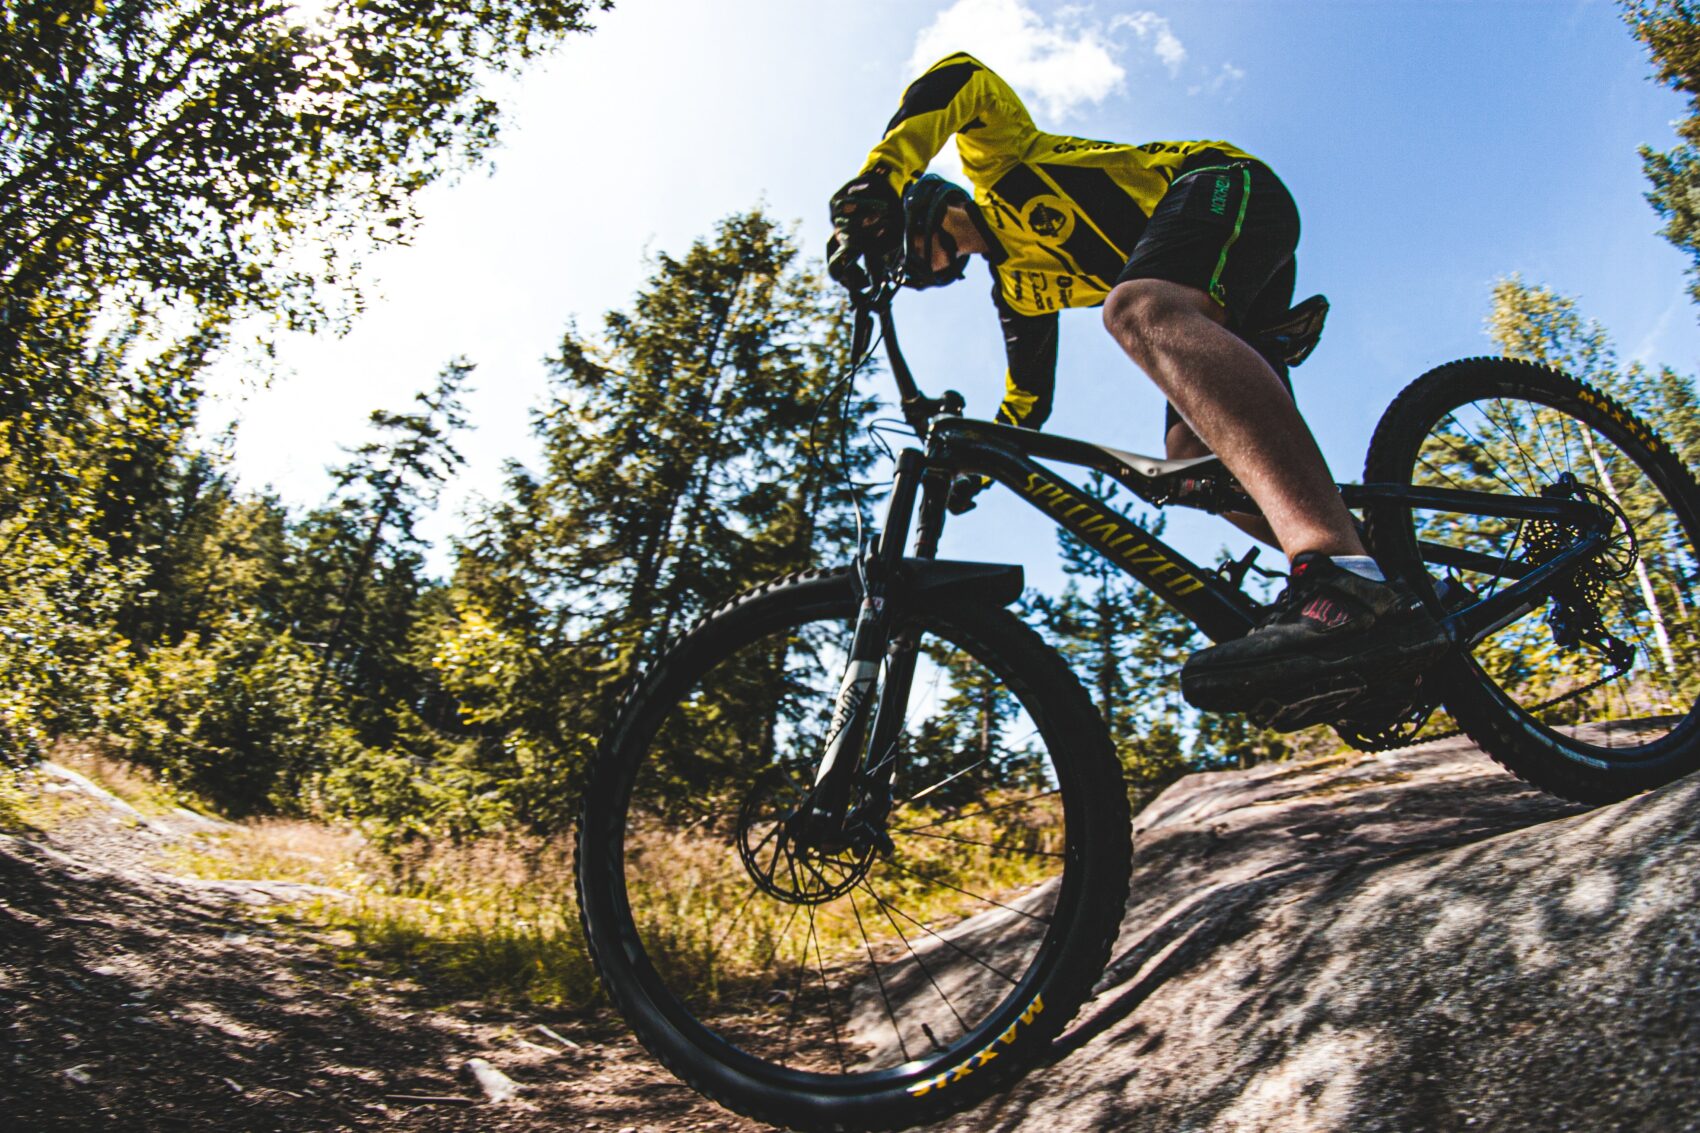 The different mountain bike disciplines